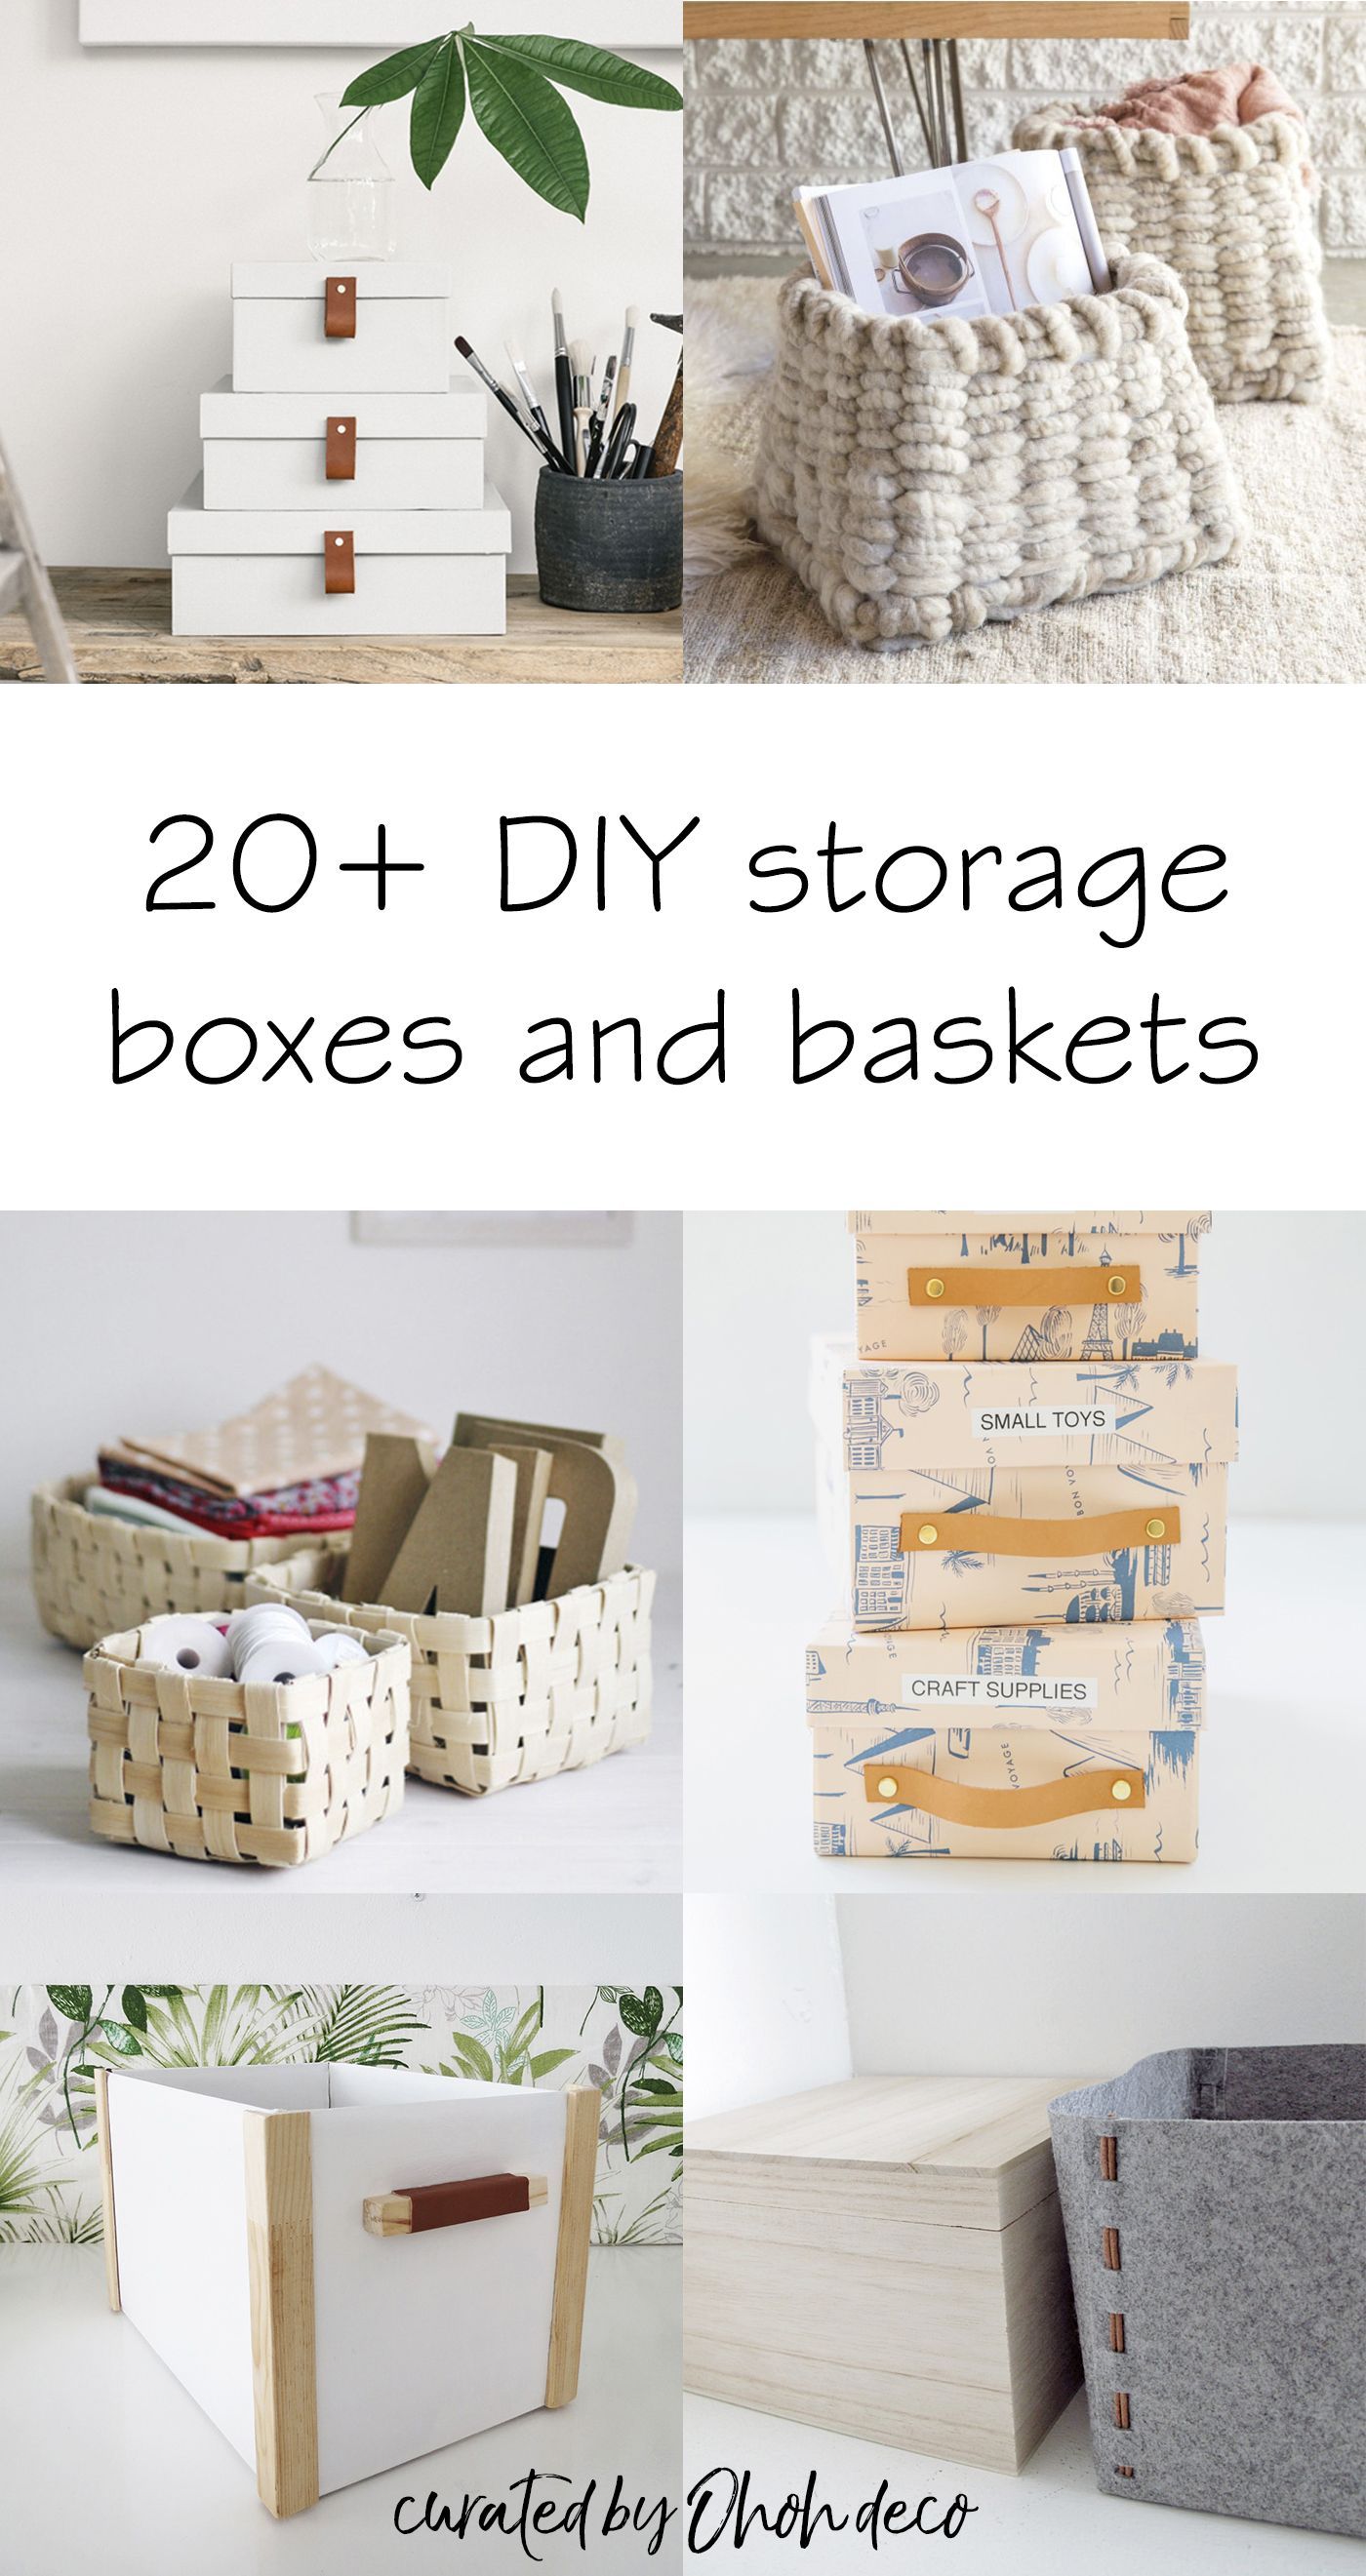 DIY Storage Boxes and Baskets - Ohoh deco - DIY Storage Boxes and Baskets - Ohoh deco -   15 diy Storage baskets ideas